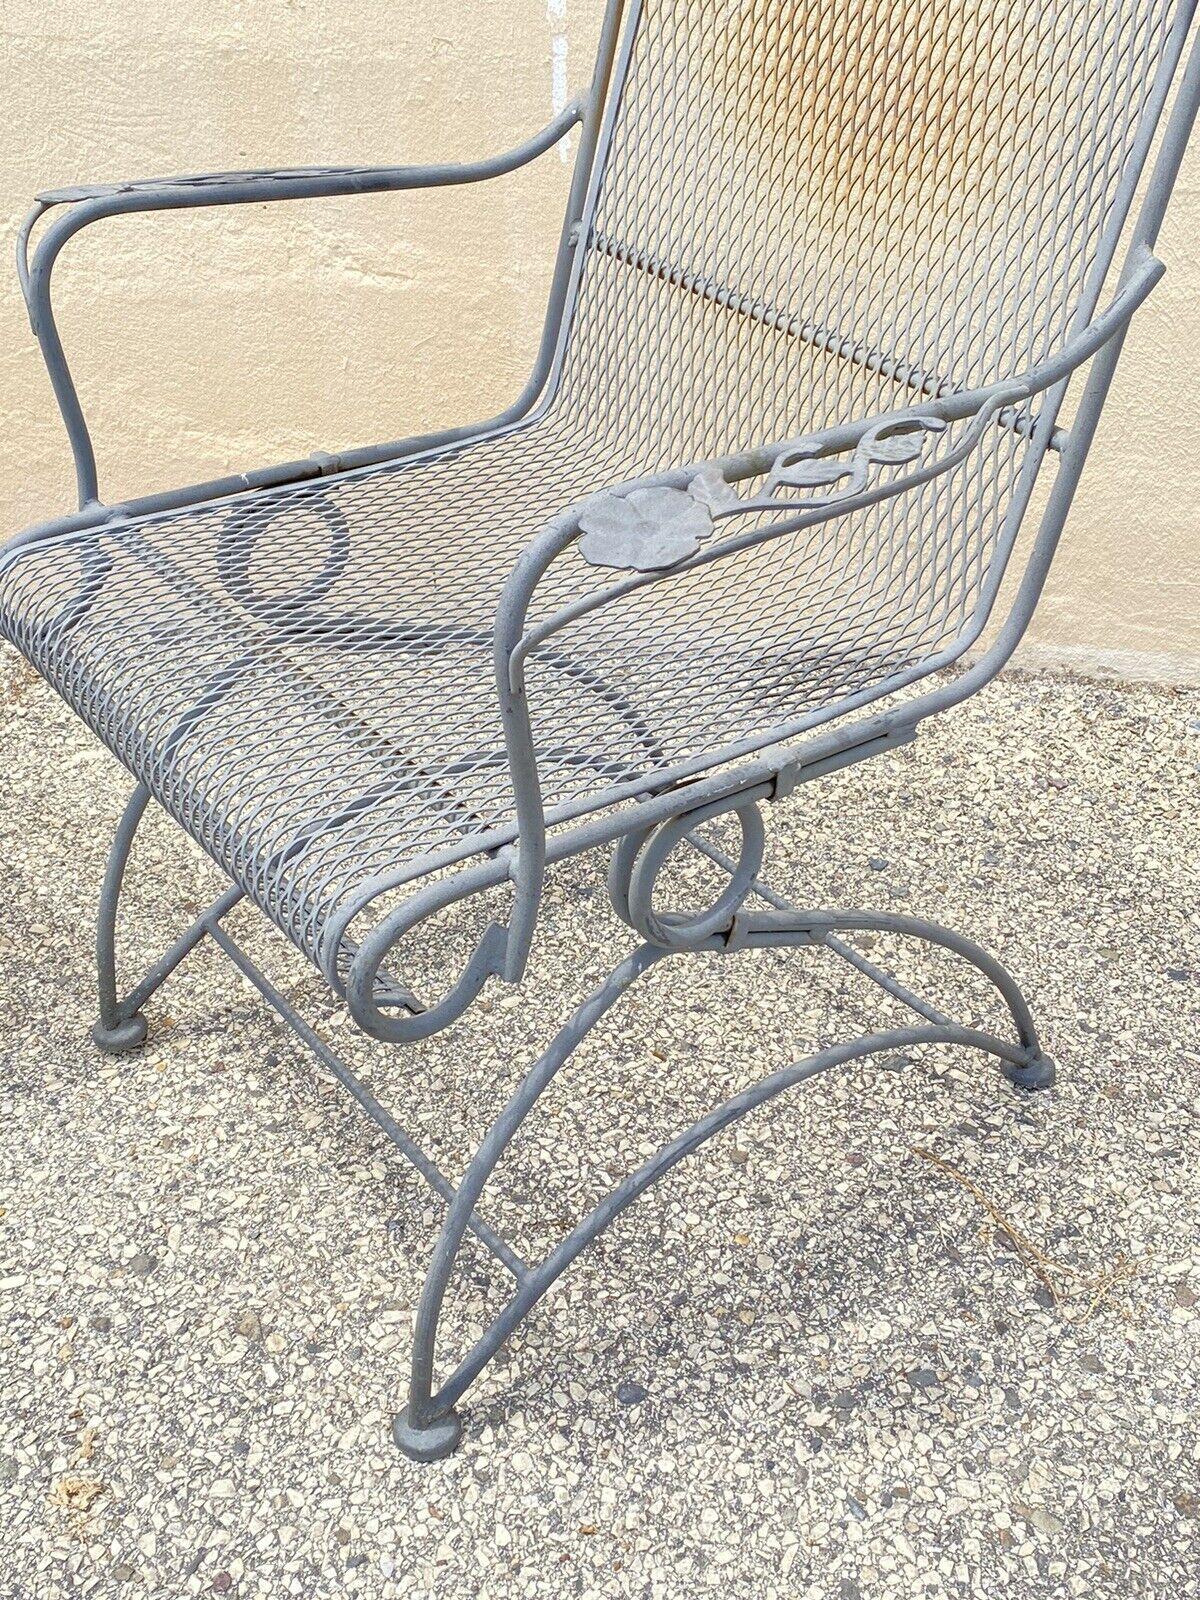 Vintage Meadowcraft Dogwood Coil Spring Wrought Iron Garden Patio Chair, a Pair 3